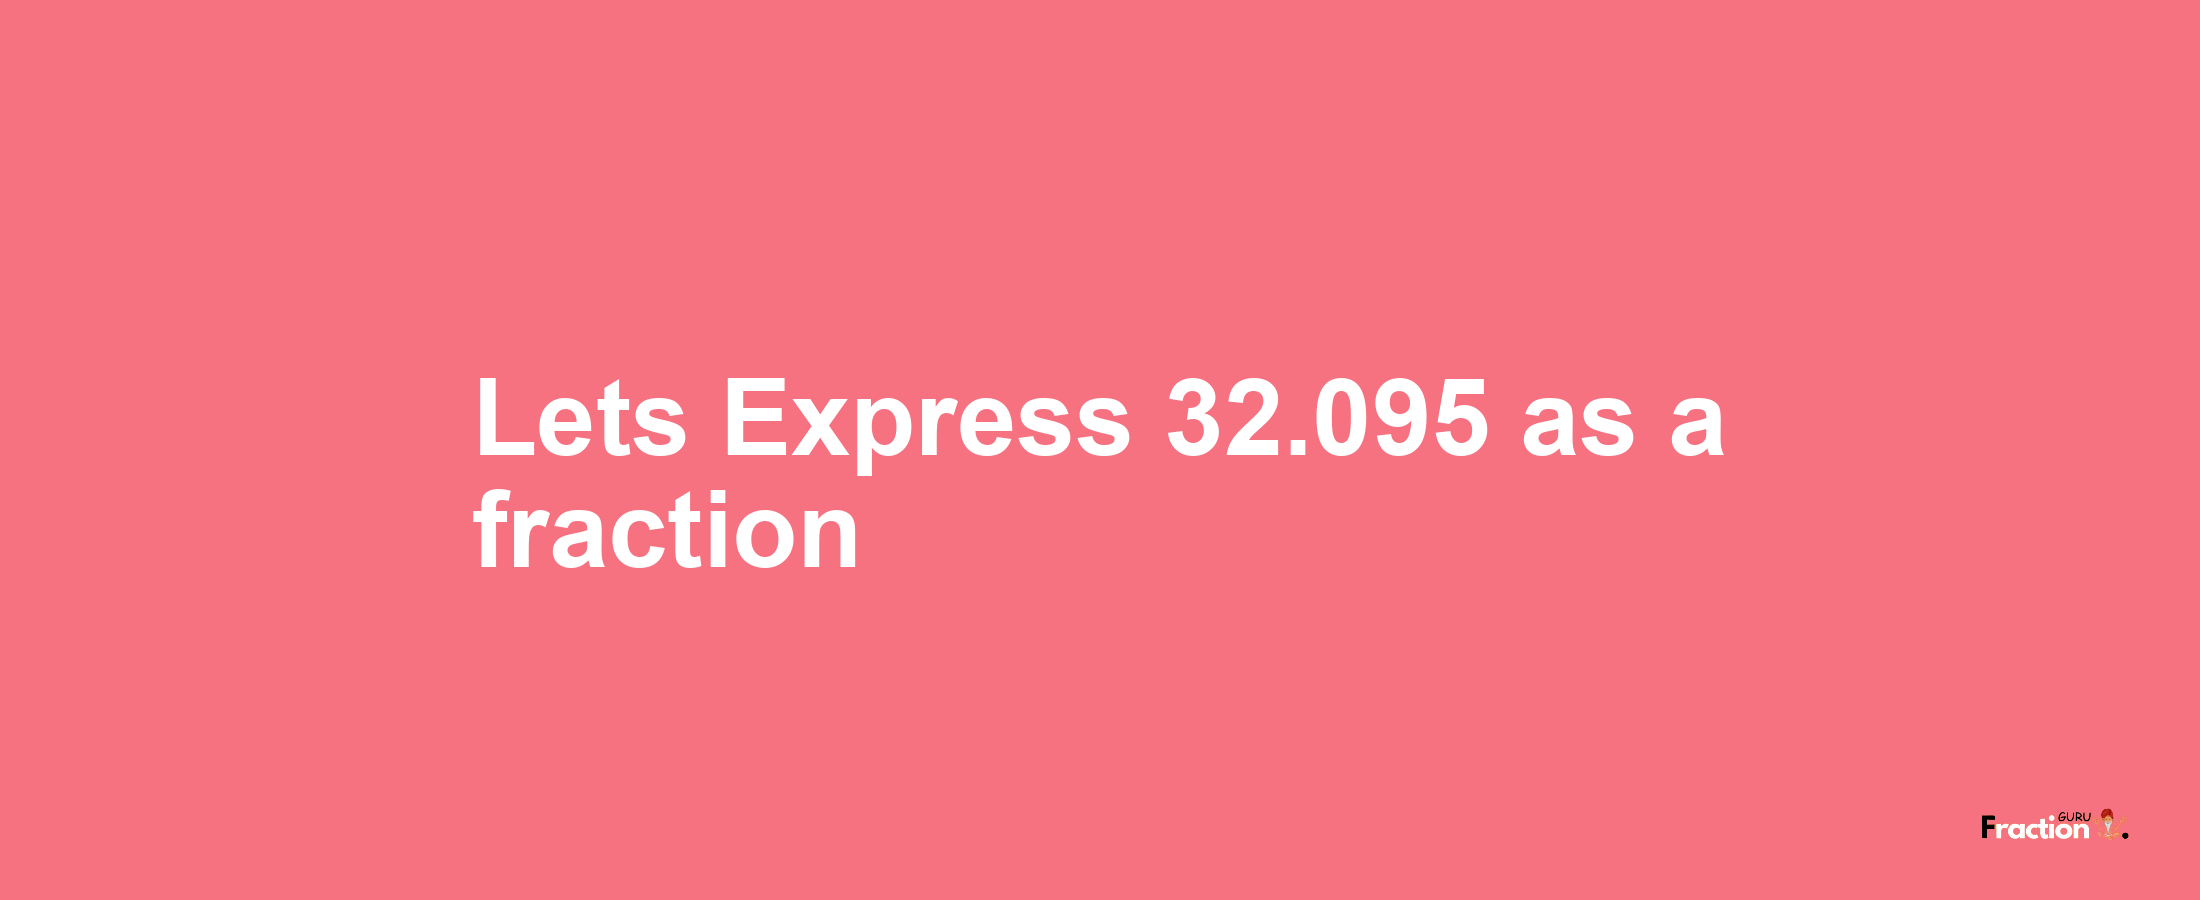 Lets Express 32.095 as afraction